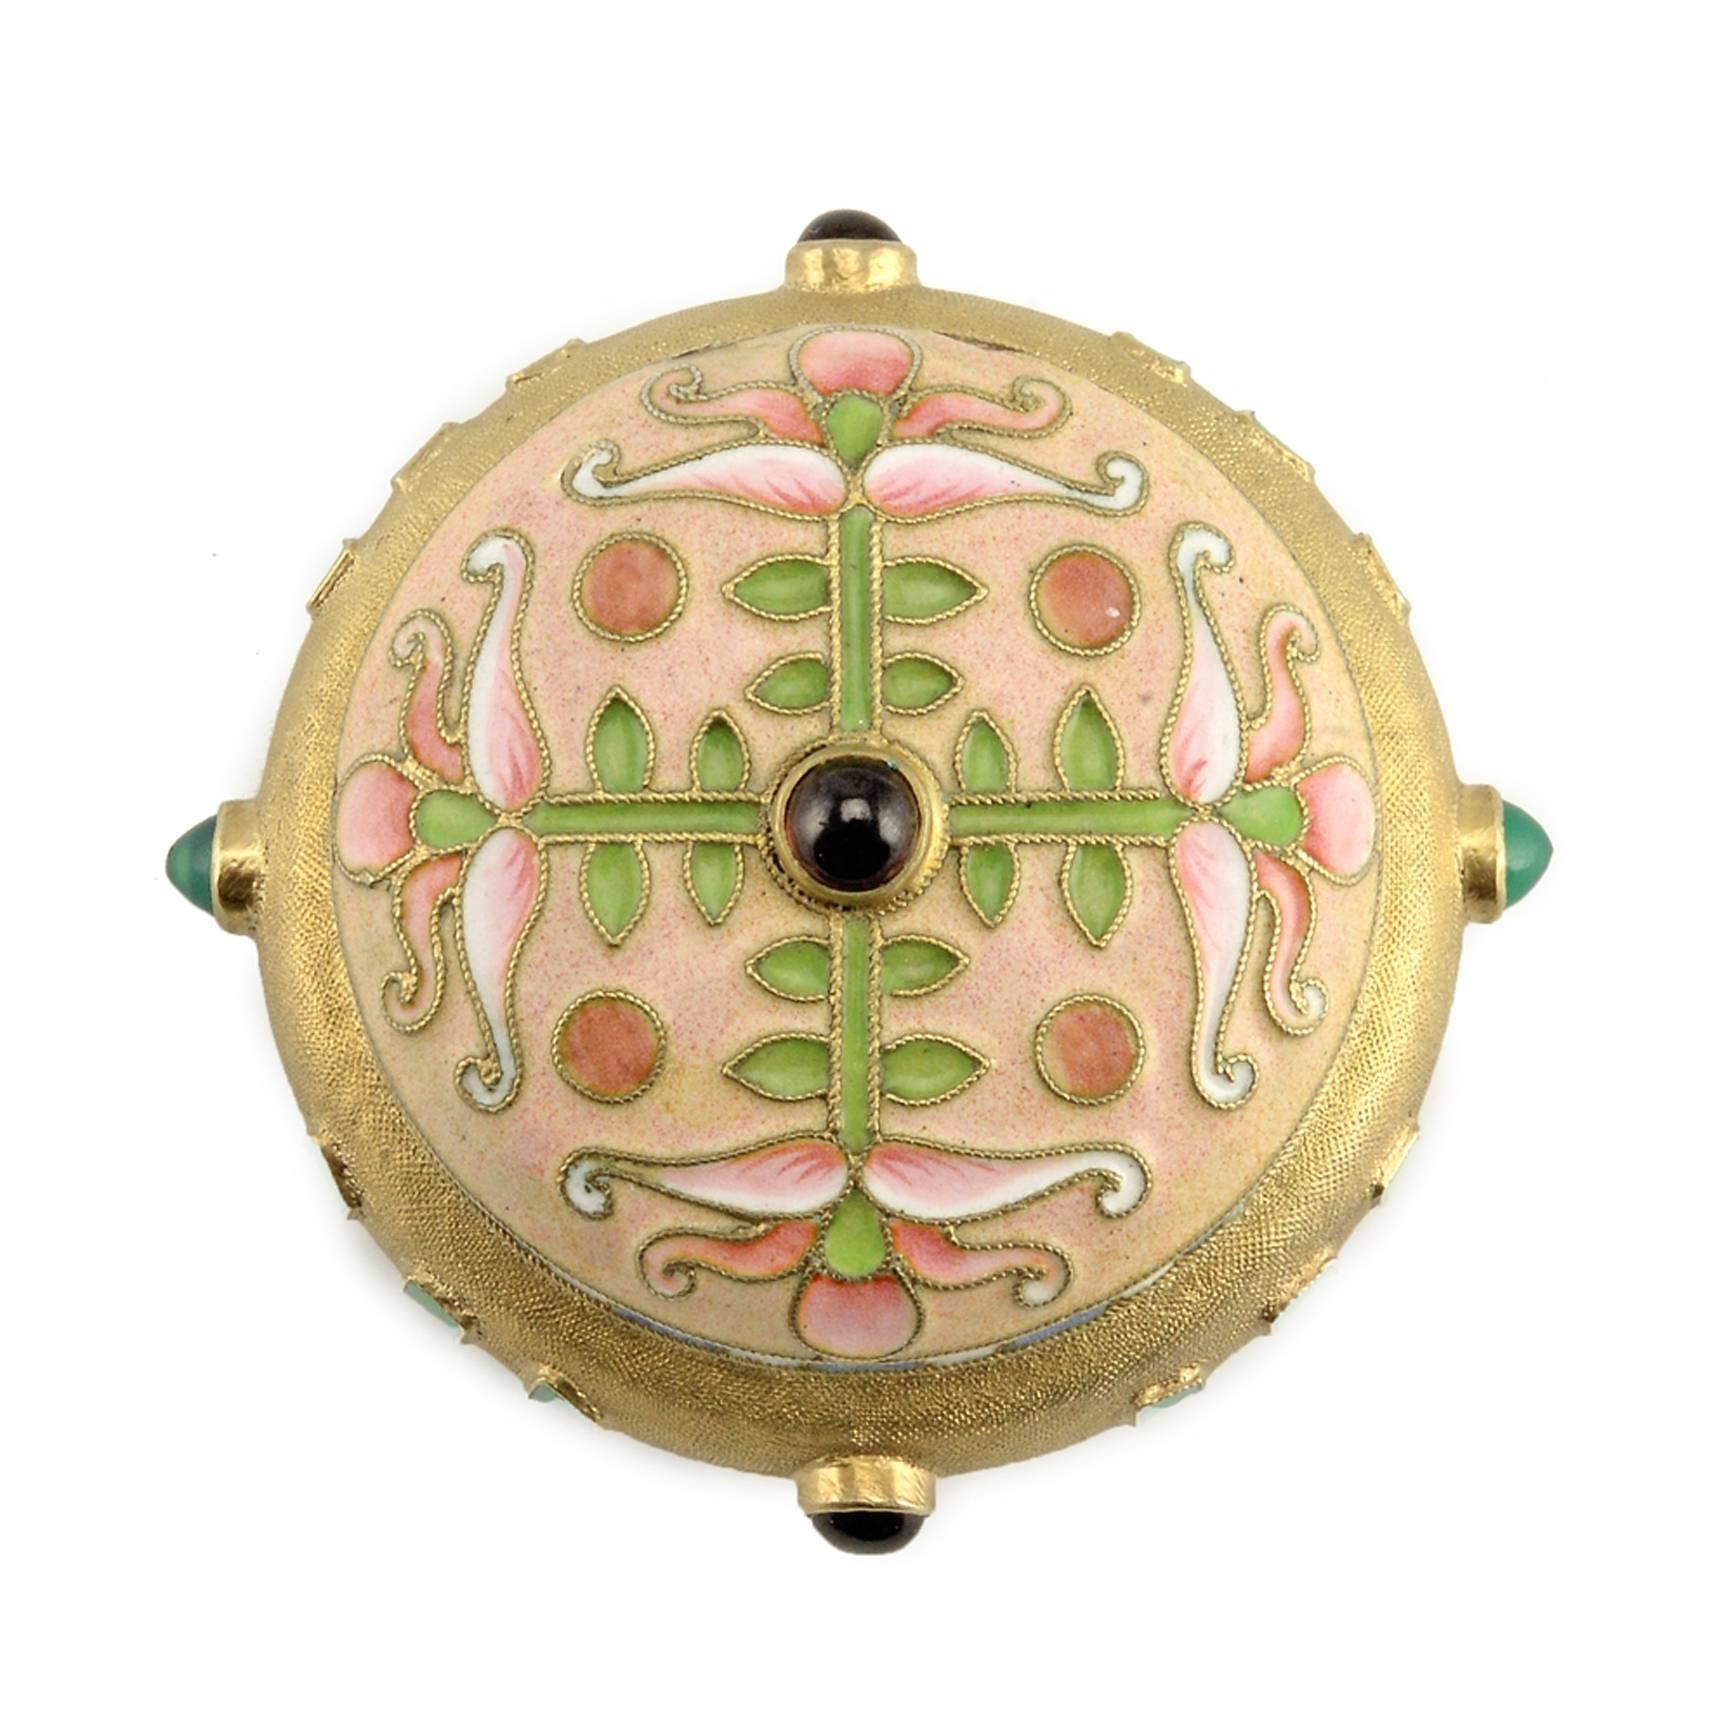 An unusual and interesting Russian gem-set gilded silver and shaded filigree enamel pastille or powder case, Maria Semenova, Moscow, circa 1896-1908. In the neo-Russian style, the hinged lid raised above the cushion-form body on a band enamelled